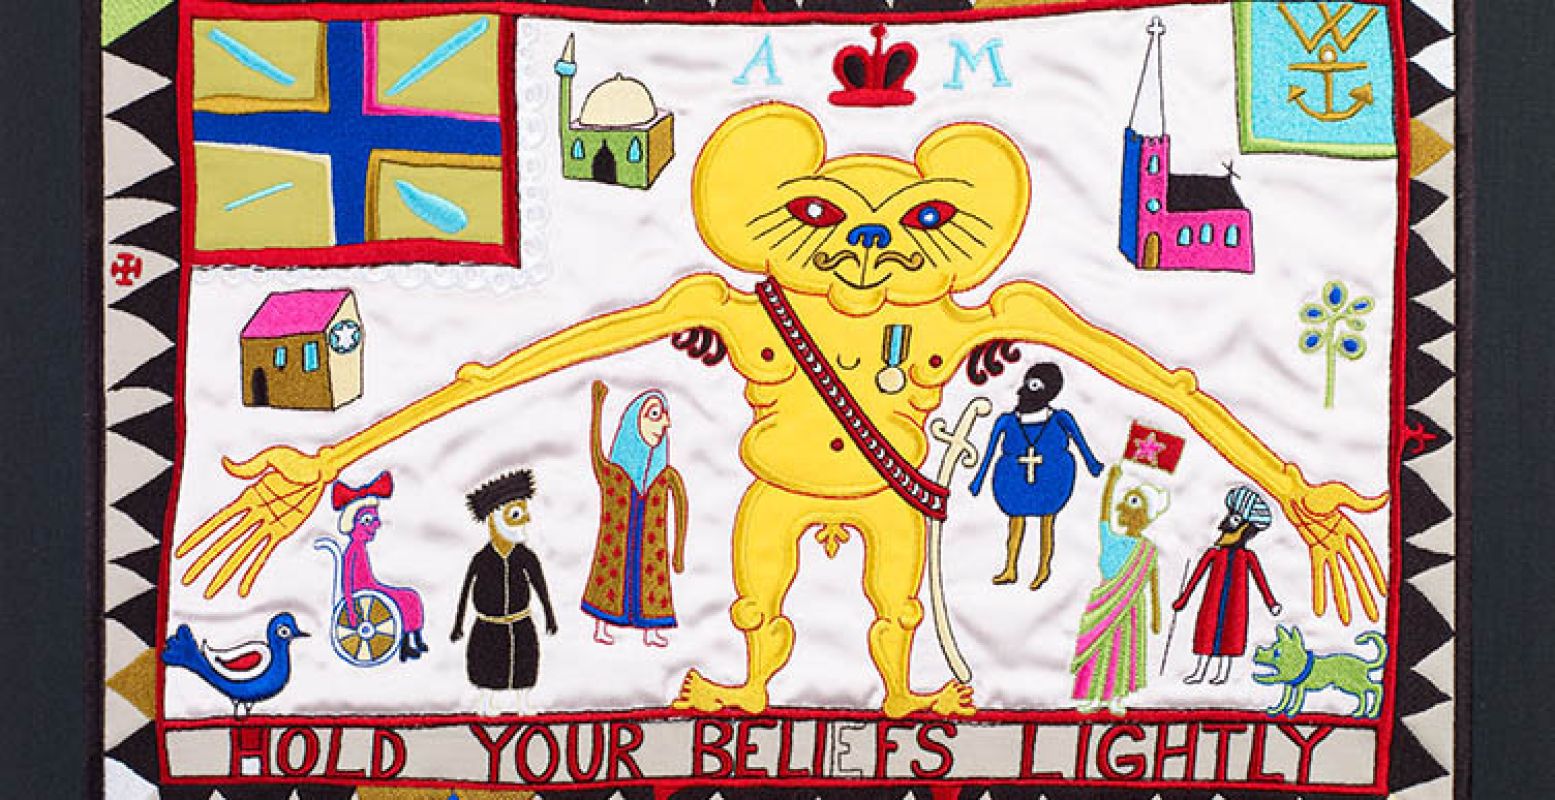 Foto: Grayson Perry, Hold Your Beliefs Lightly, 2011, Courtesy the Artist.